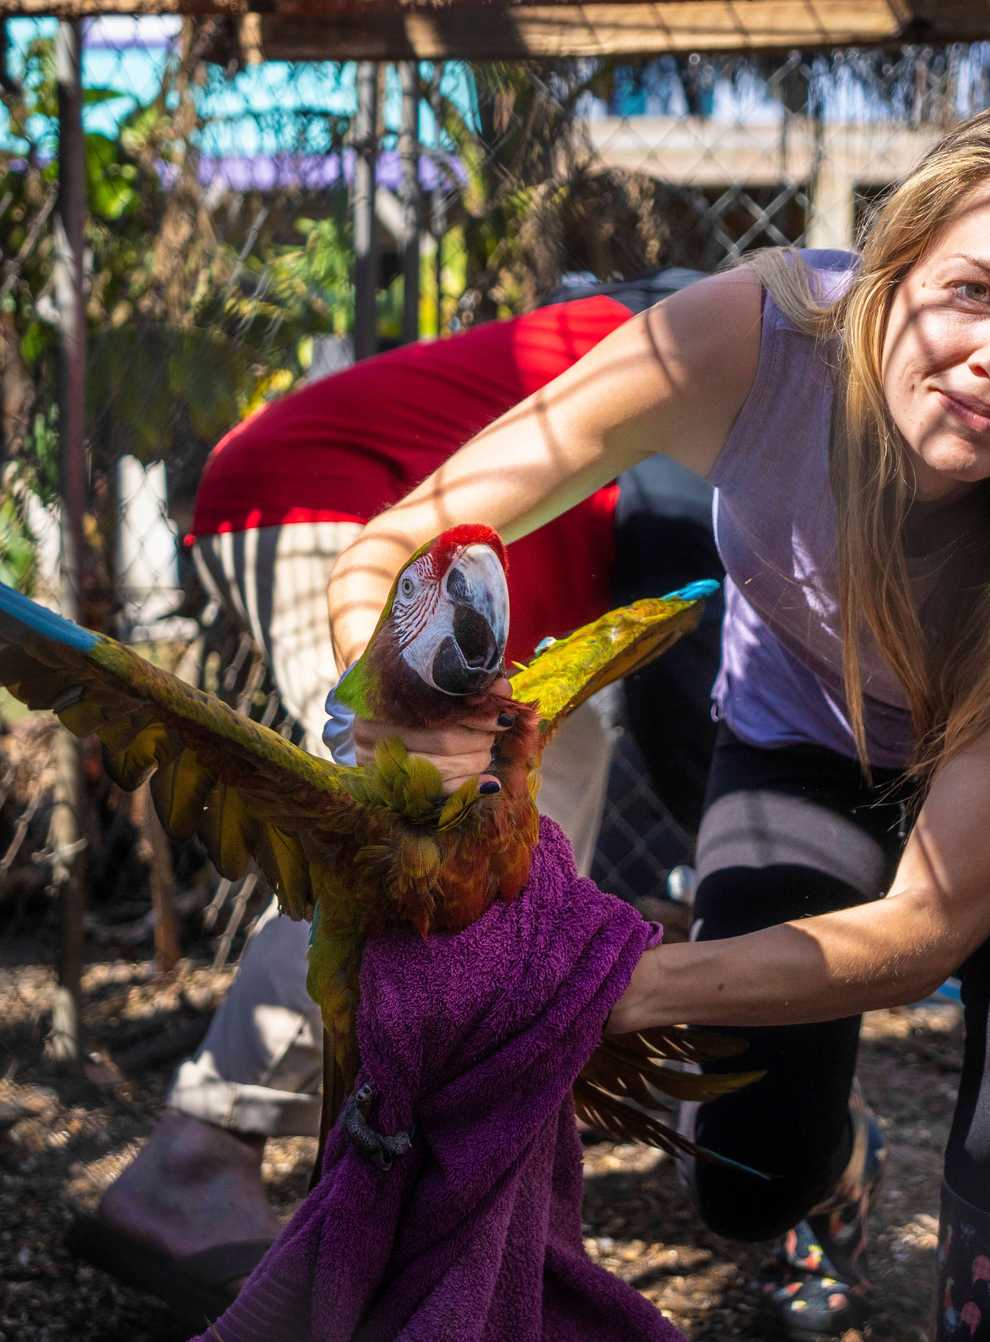 Alexis Highland handles a parrot at the Malama Manu Sanctuary in Pine Island (AP)